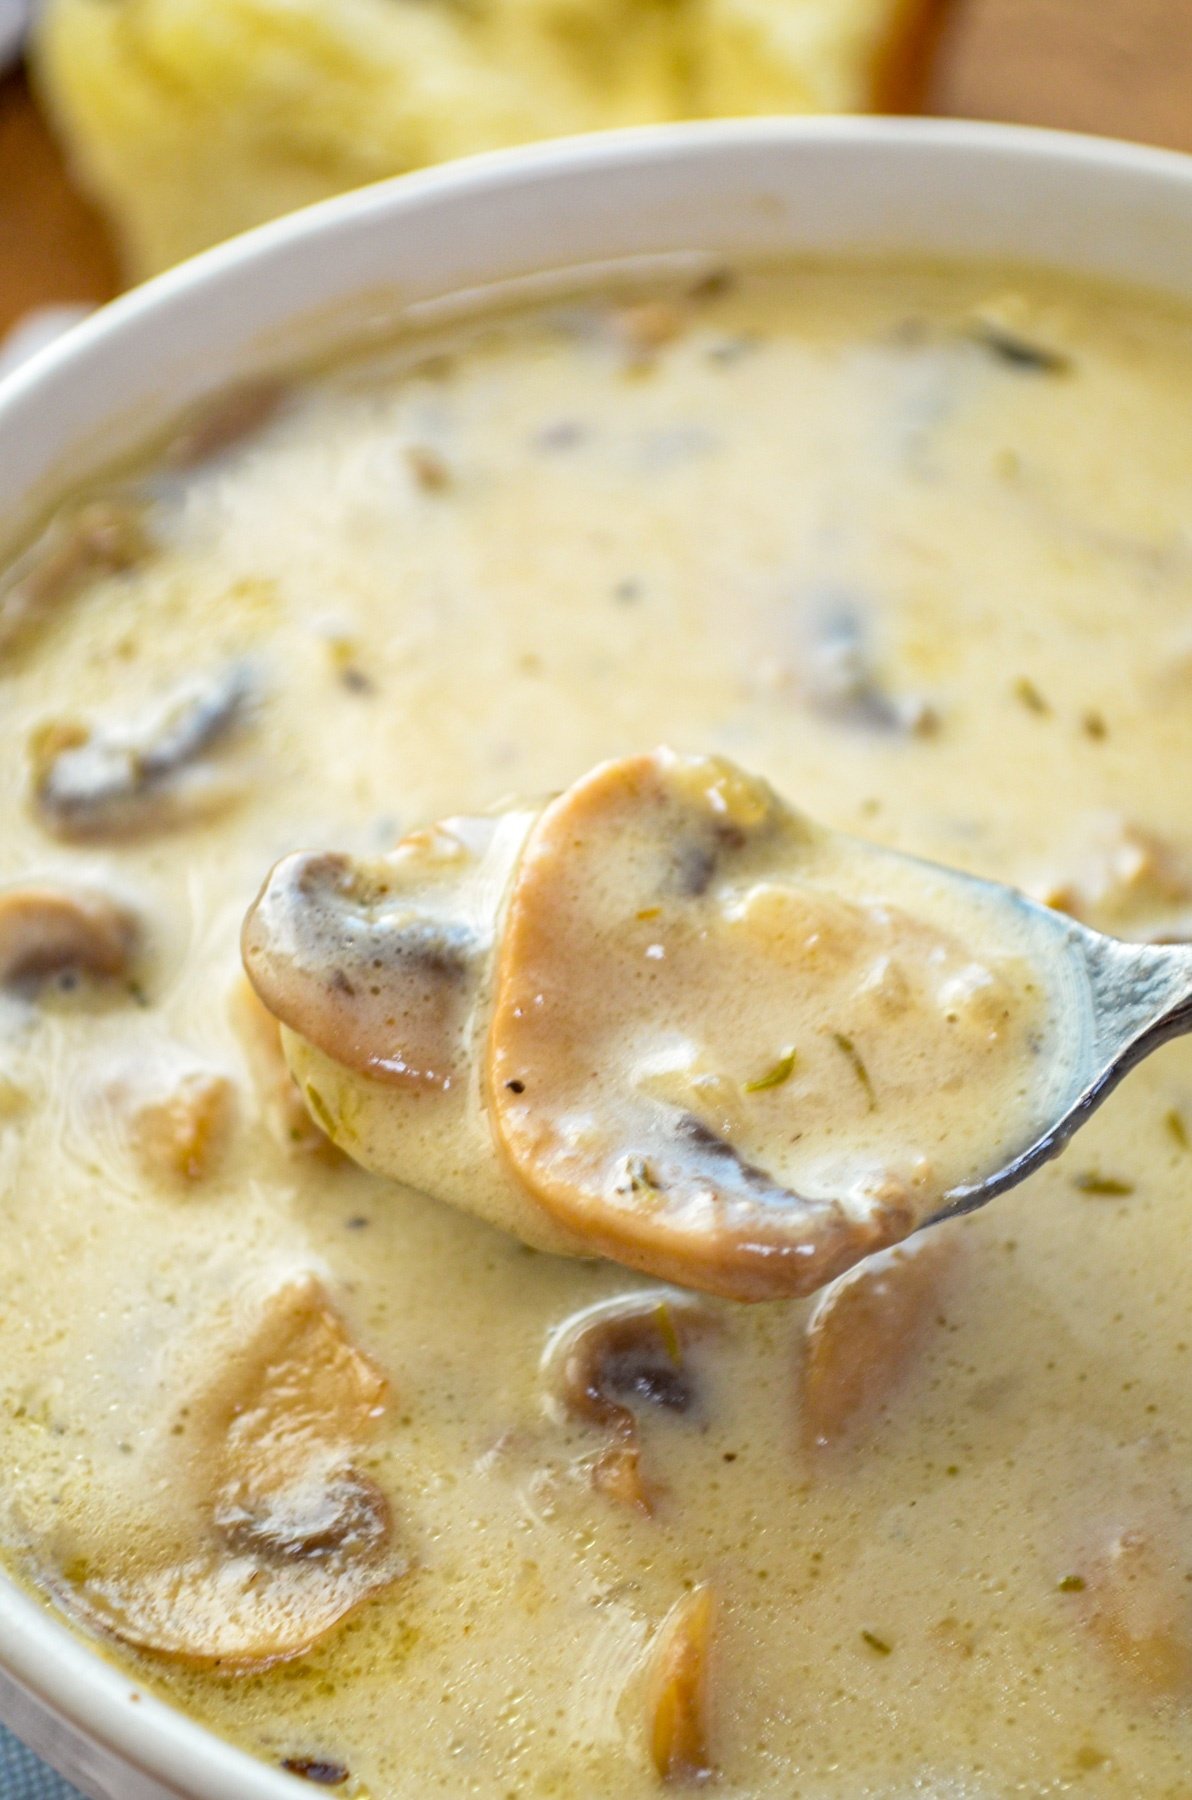 A bowl of mushroom soup with a spoon taking a spoonful.